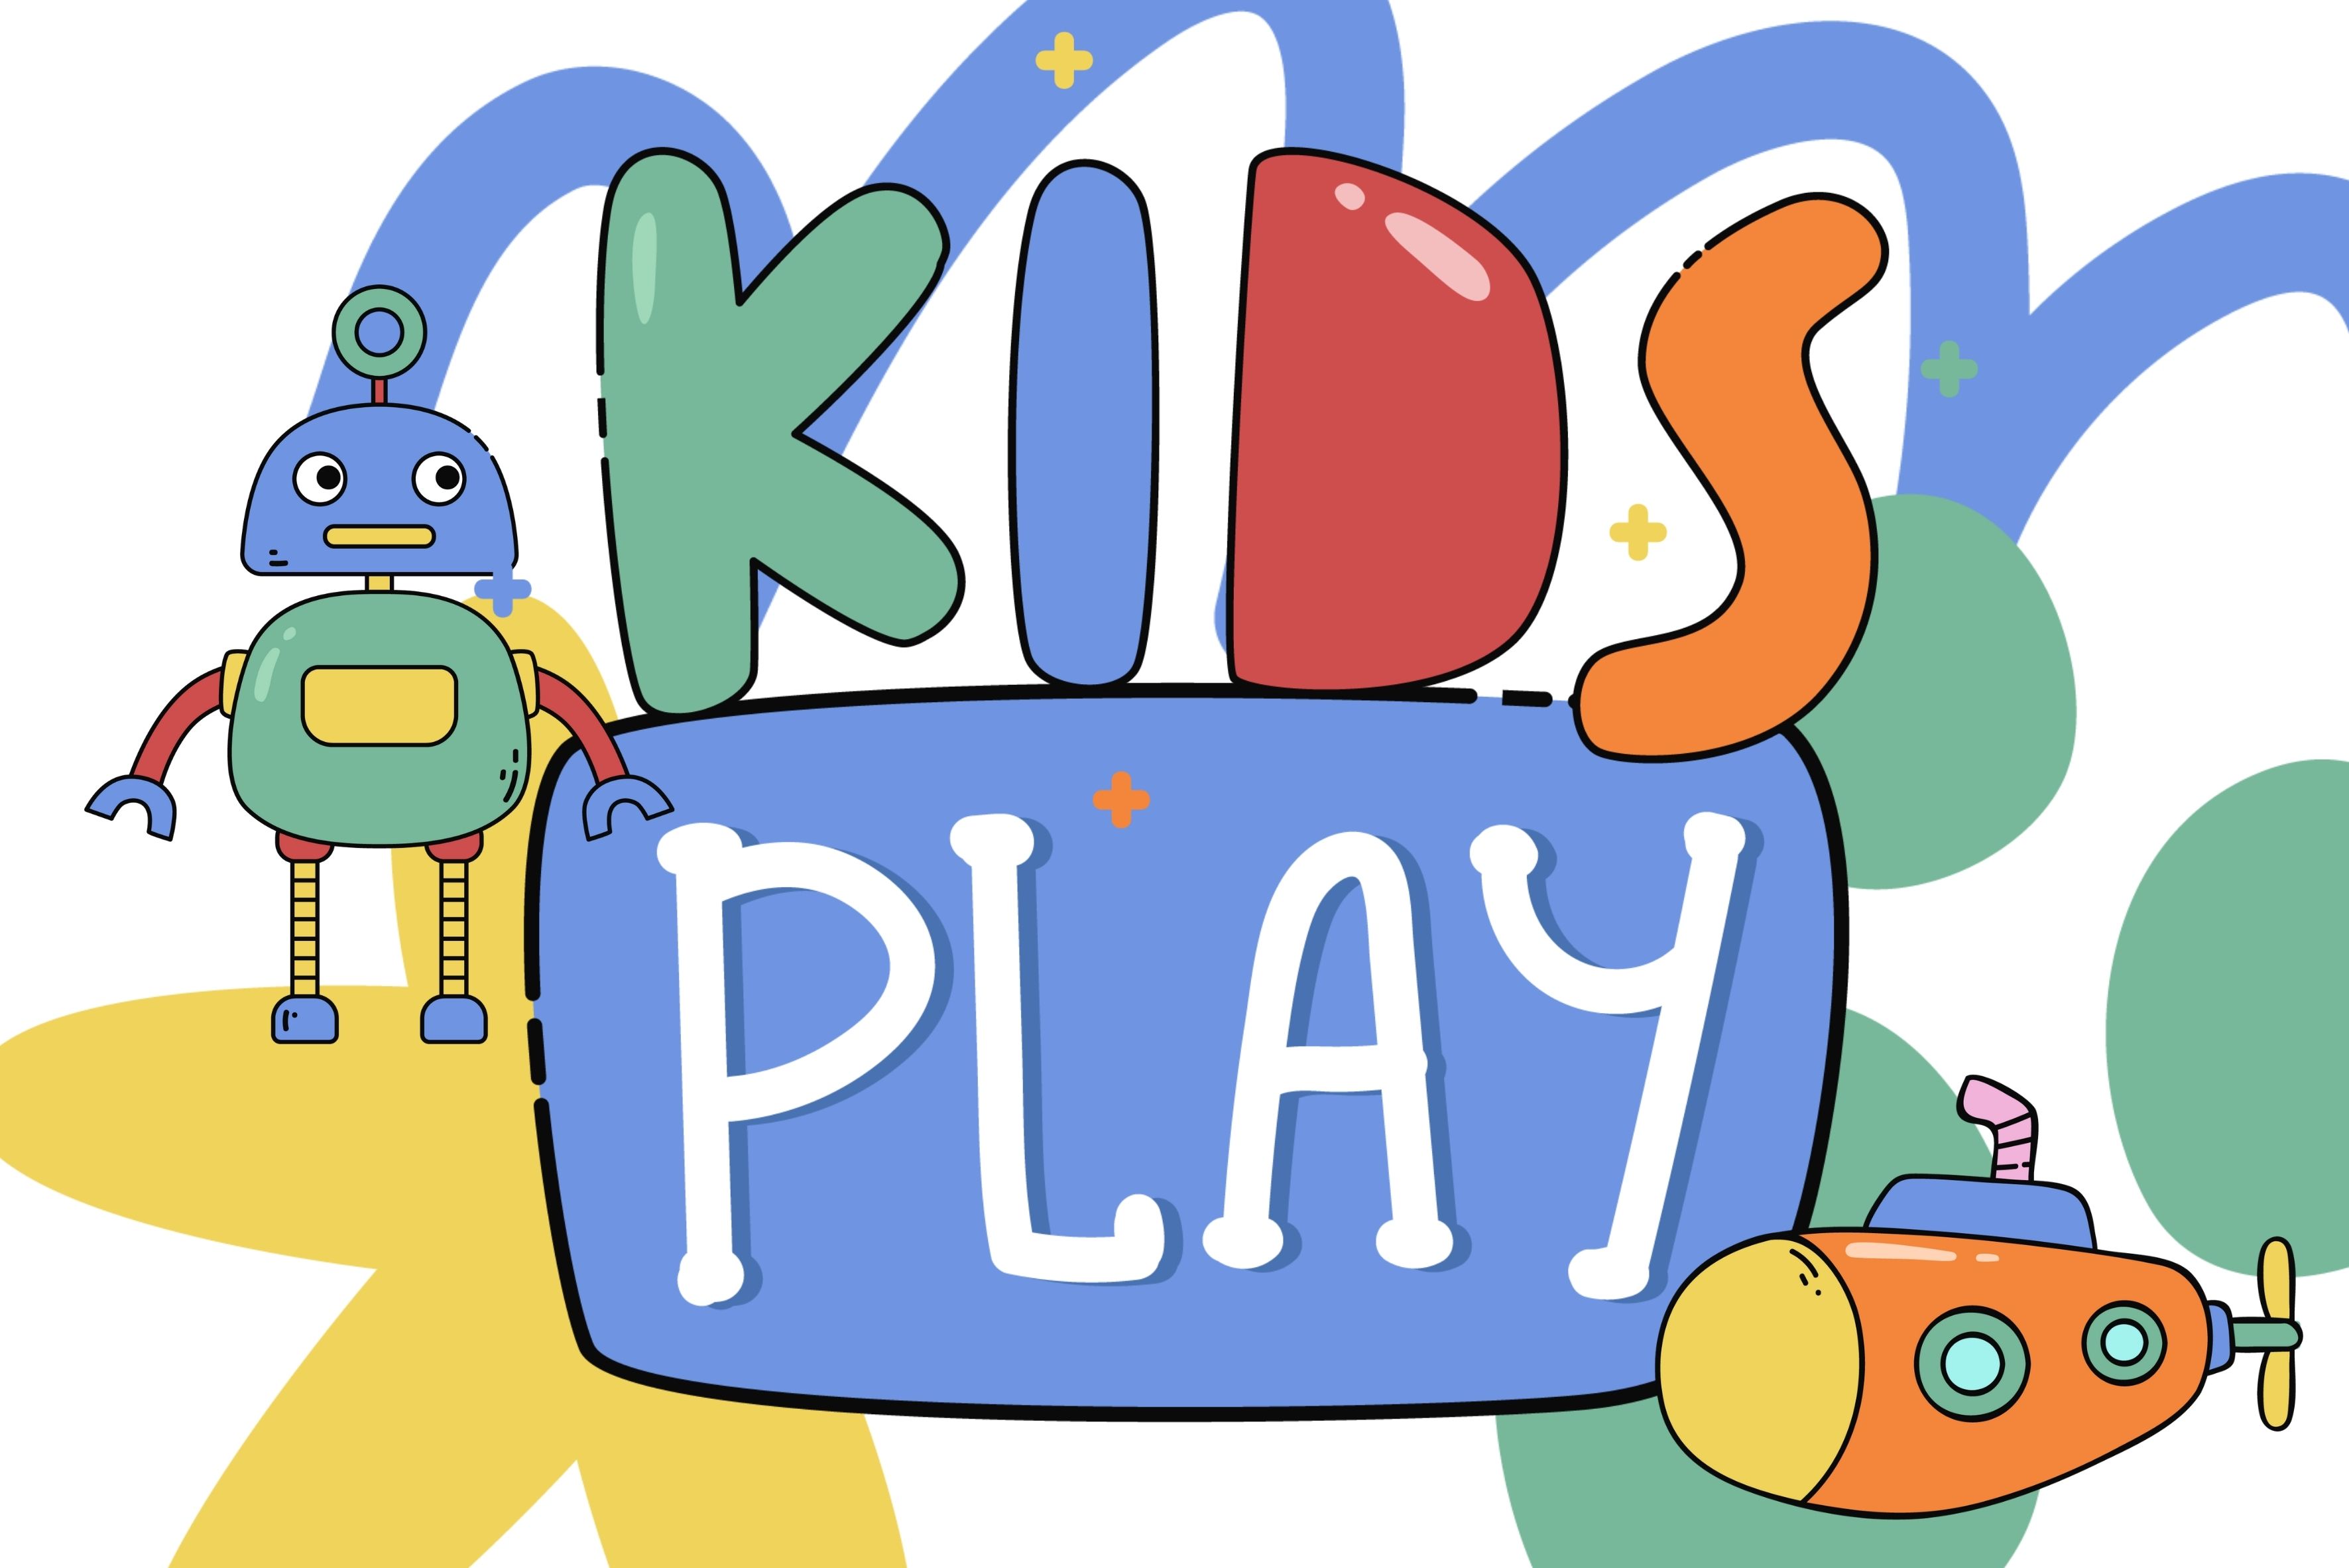 the words "kids play" with multicolored squiggles and toys